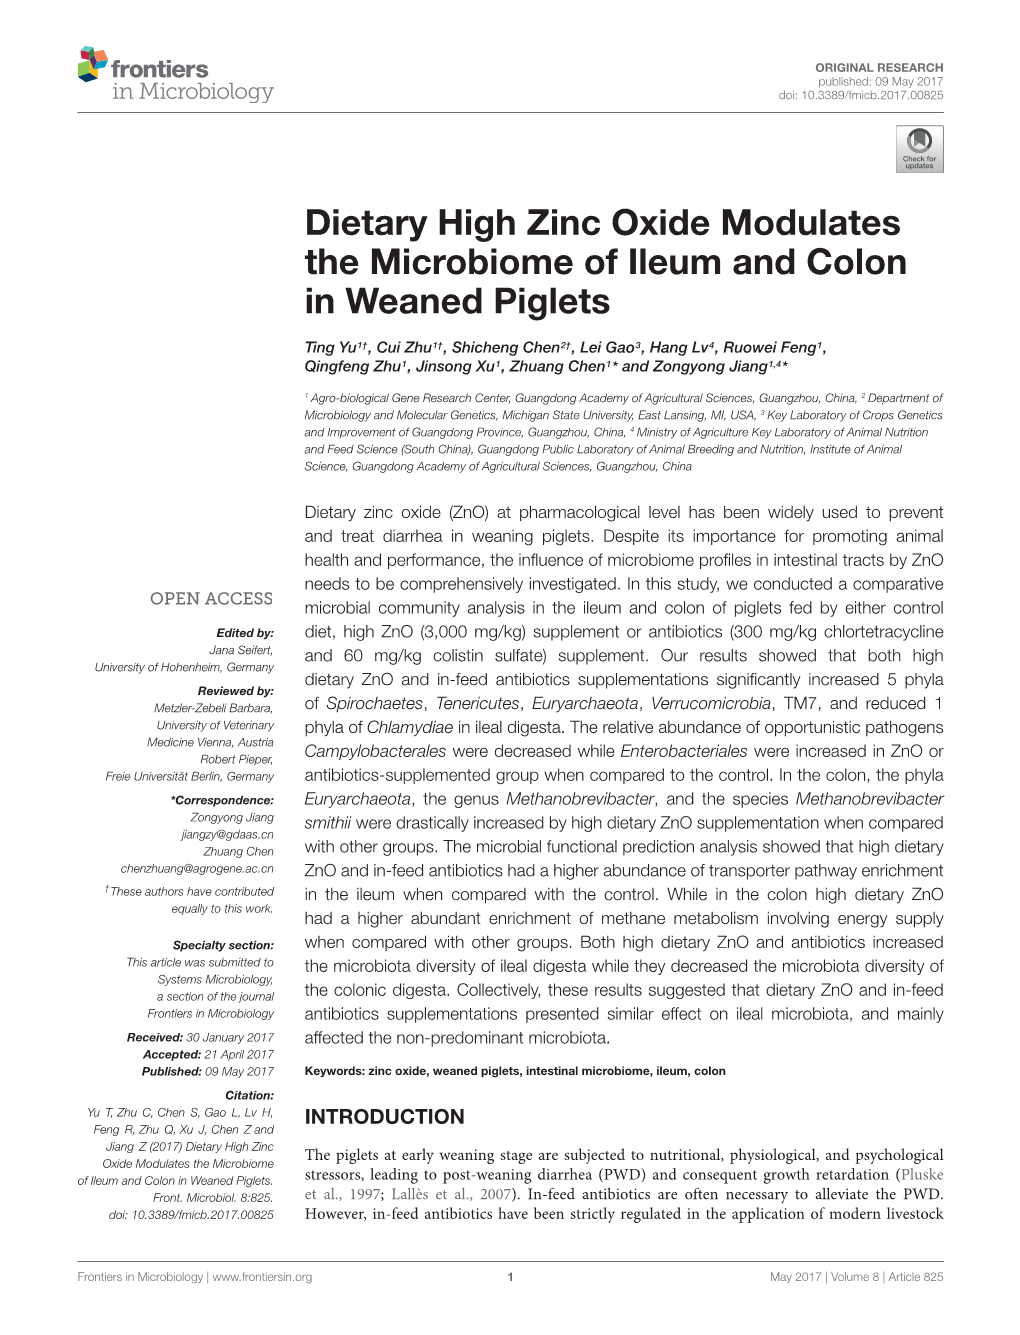 Dietary High Zinc Oxide Modulates the Microbiome of Ileum and Colon in Weaned Piglets